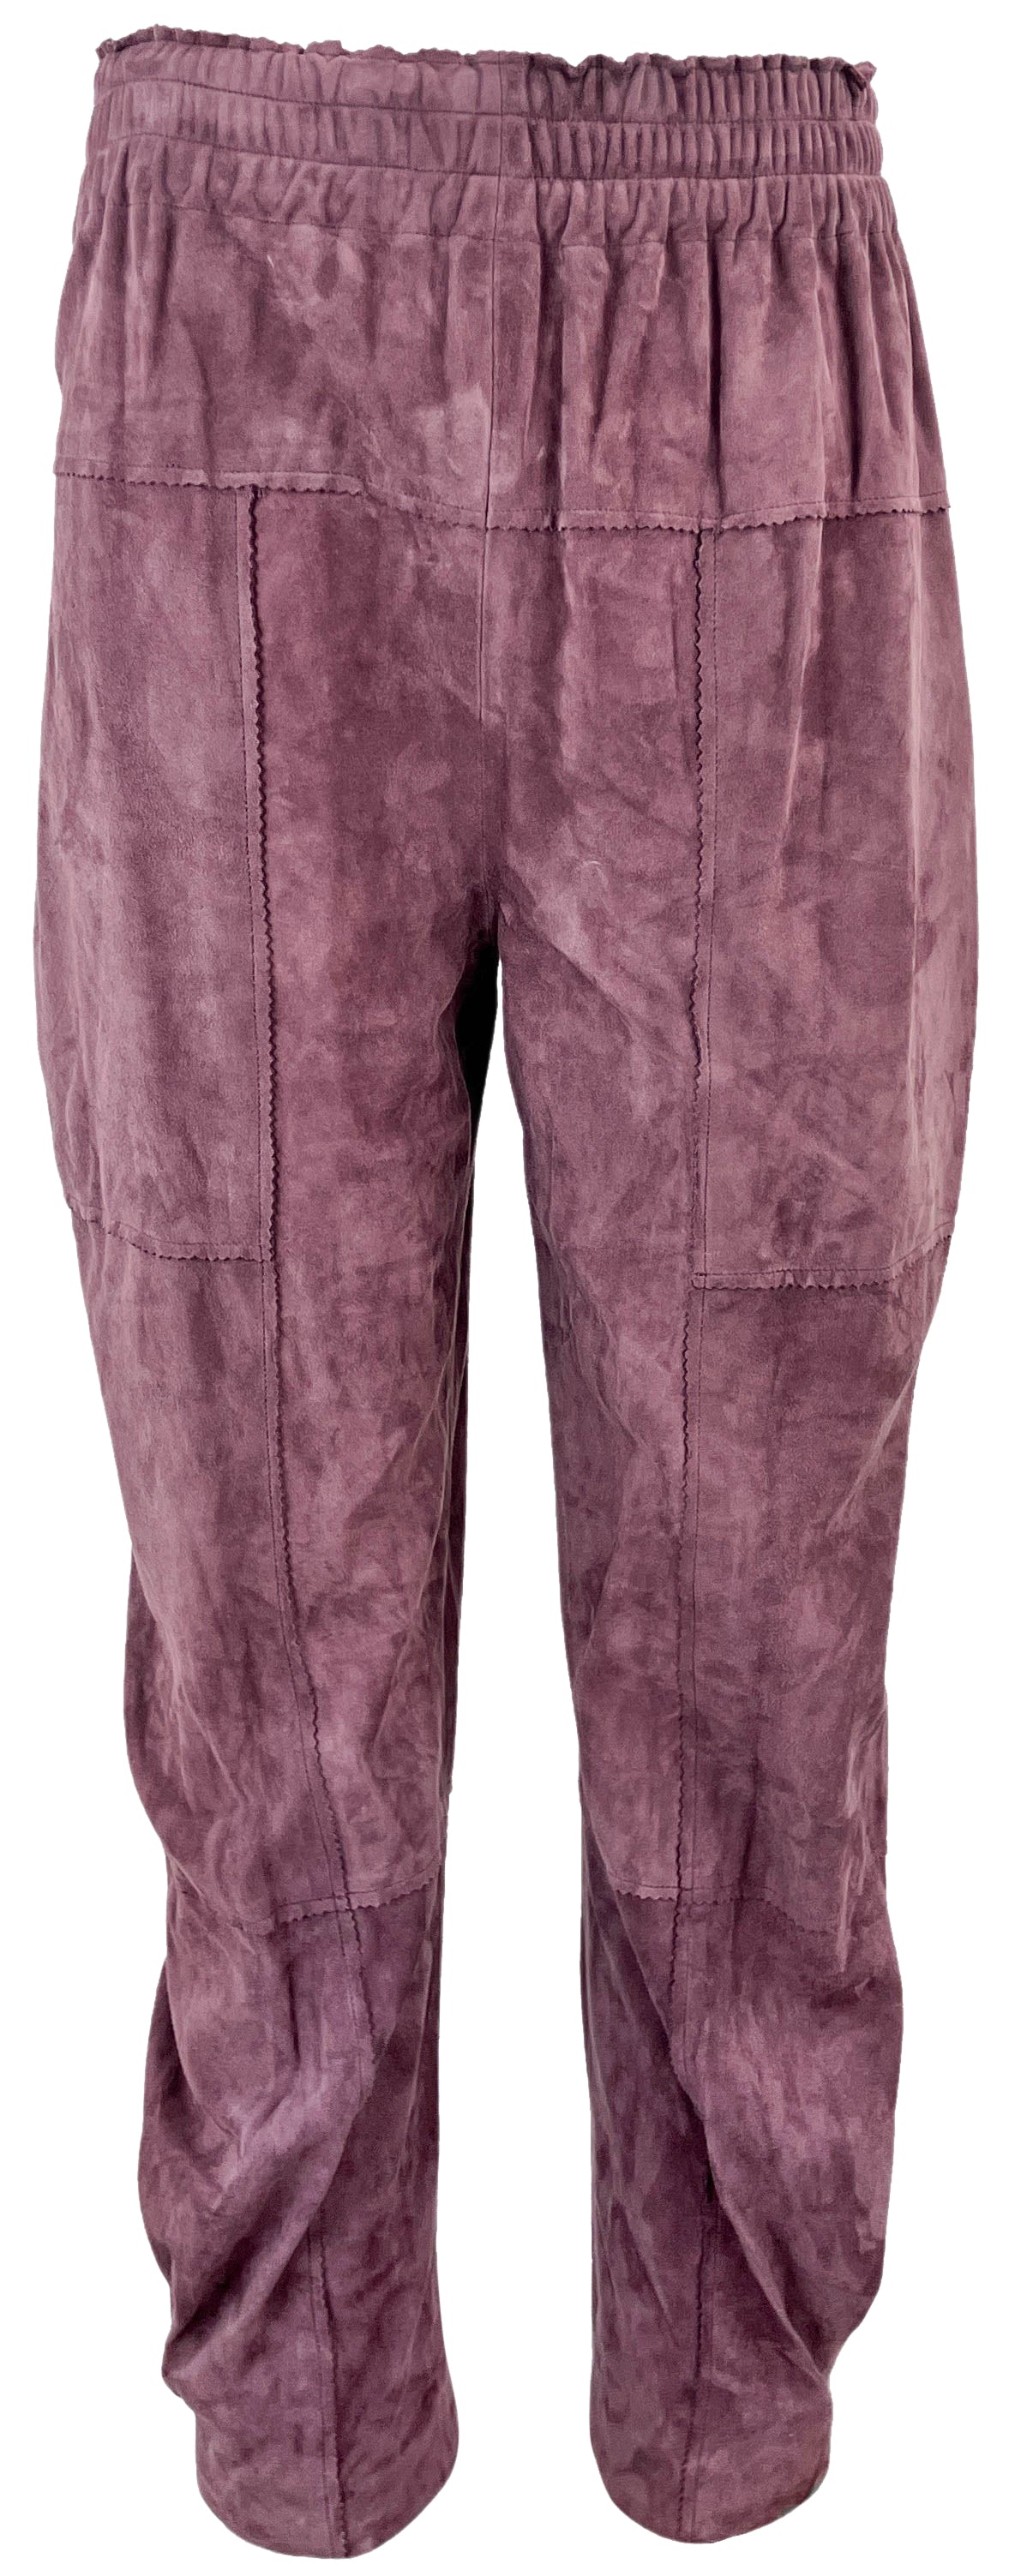 Ulla Johnson Tapered Suede Trousers in Wisteria - Discounts on Ulla Johnson at UAL